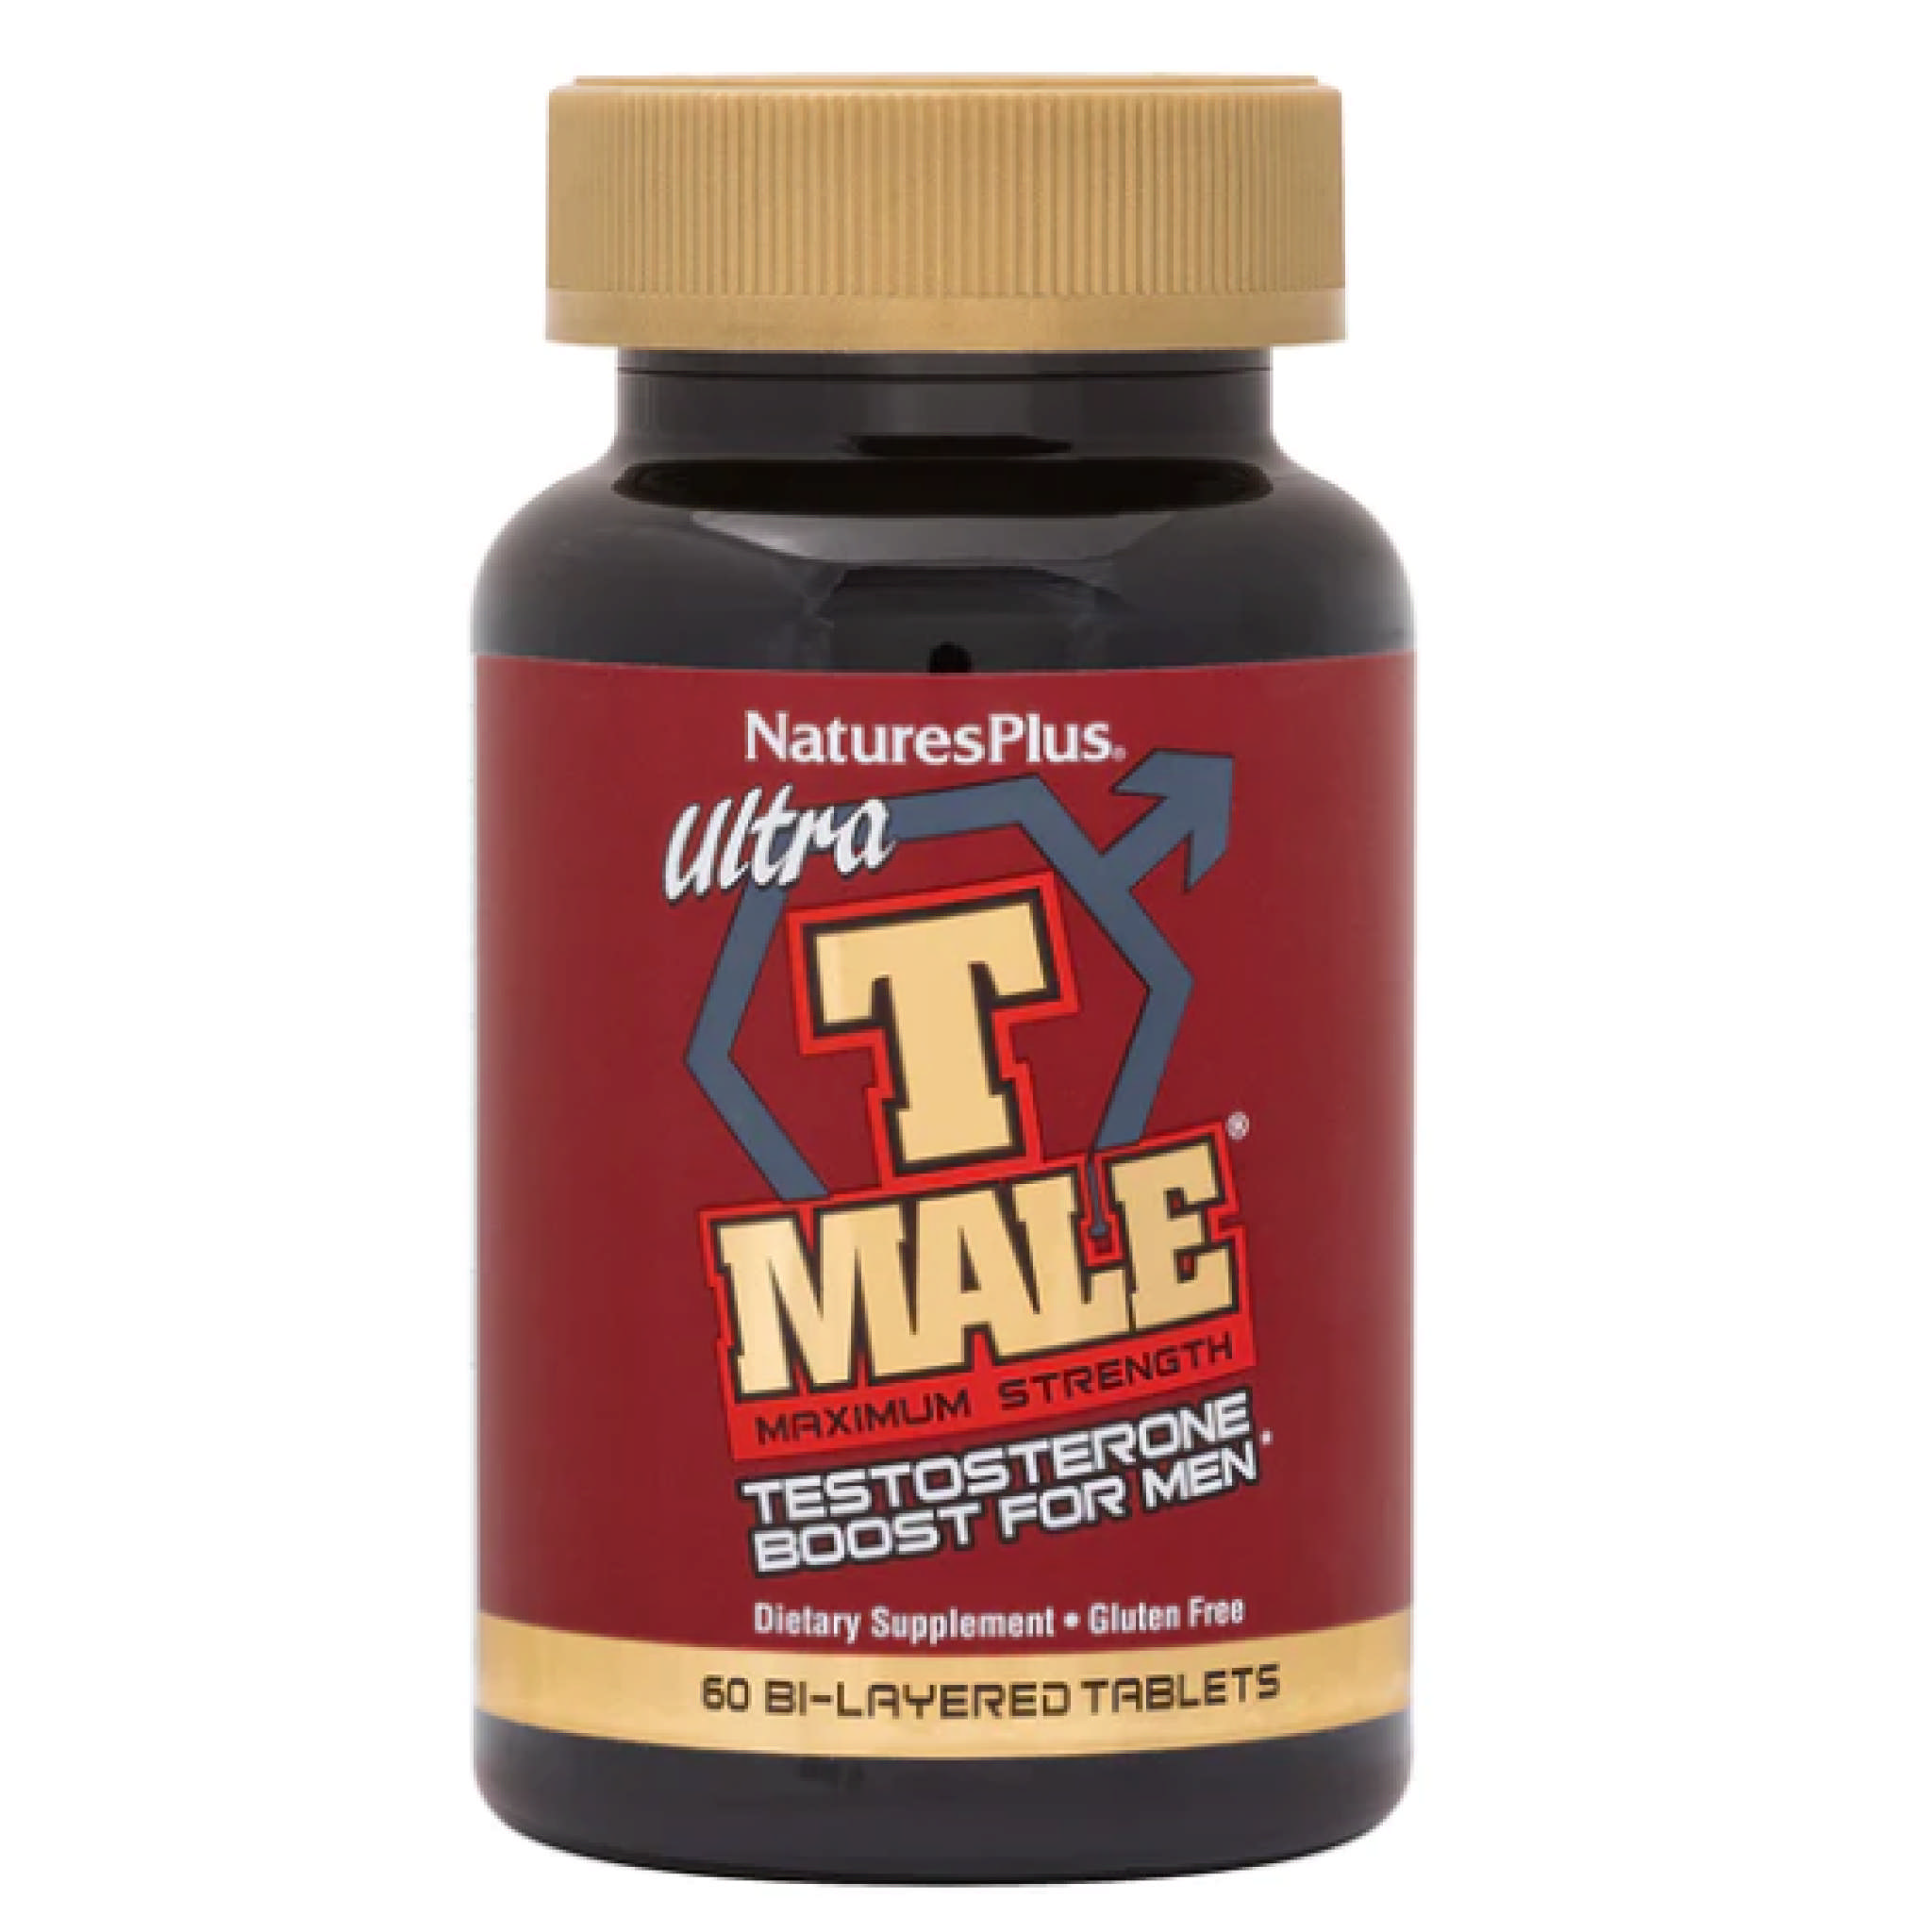 Natures Plus - Ultra T Male tab Testosterone